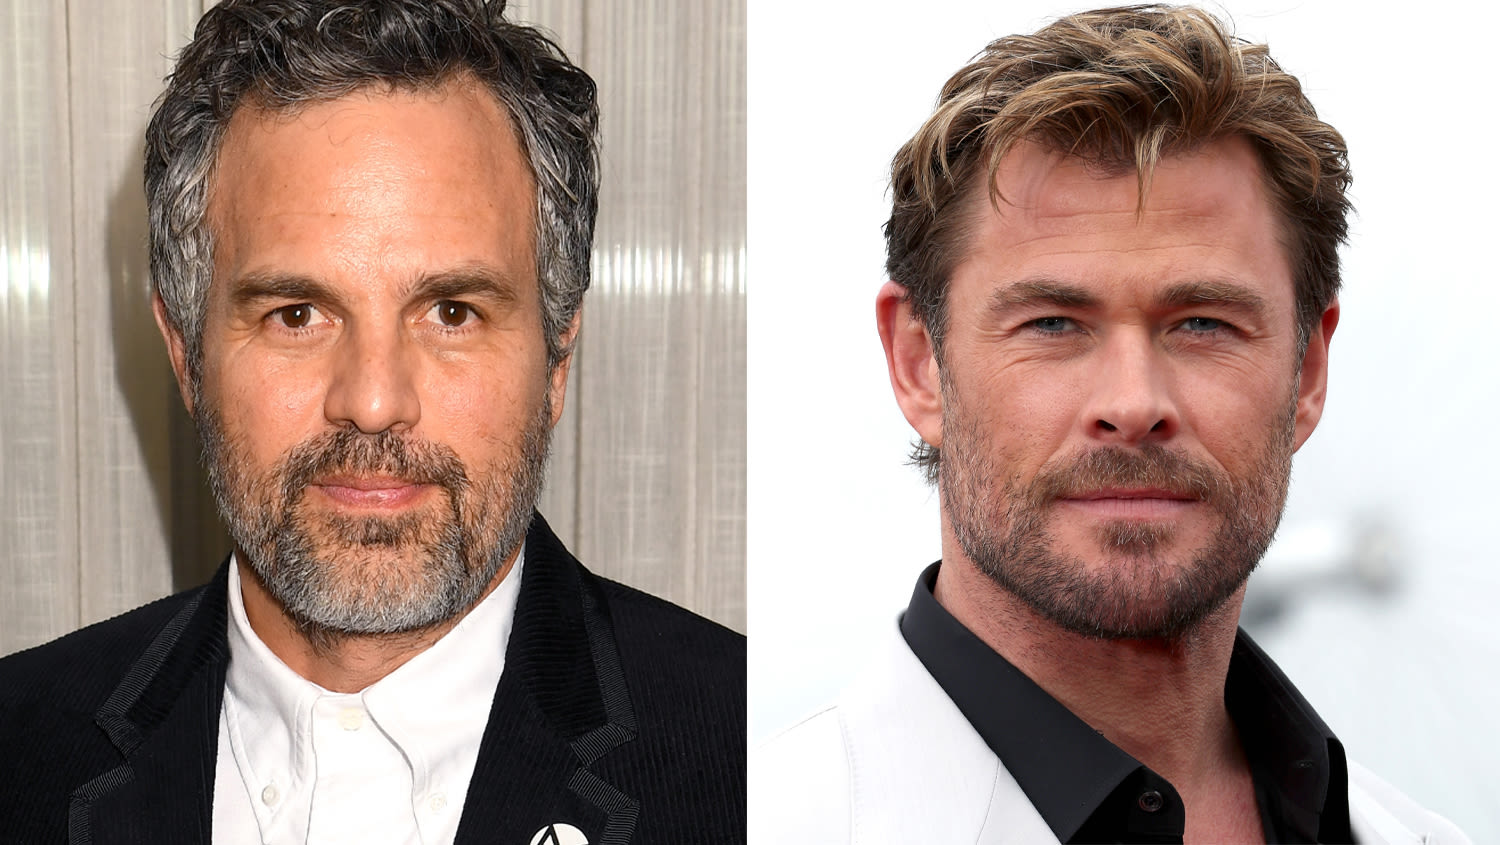 Mark Ruffalo In Talks To Co-Star Opposite Chris Hemsworth In Amazon MGM Studios’ Adaptation Of Don Winslow’s ‘Crime 101’